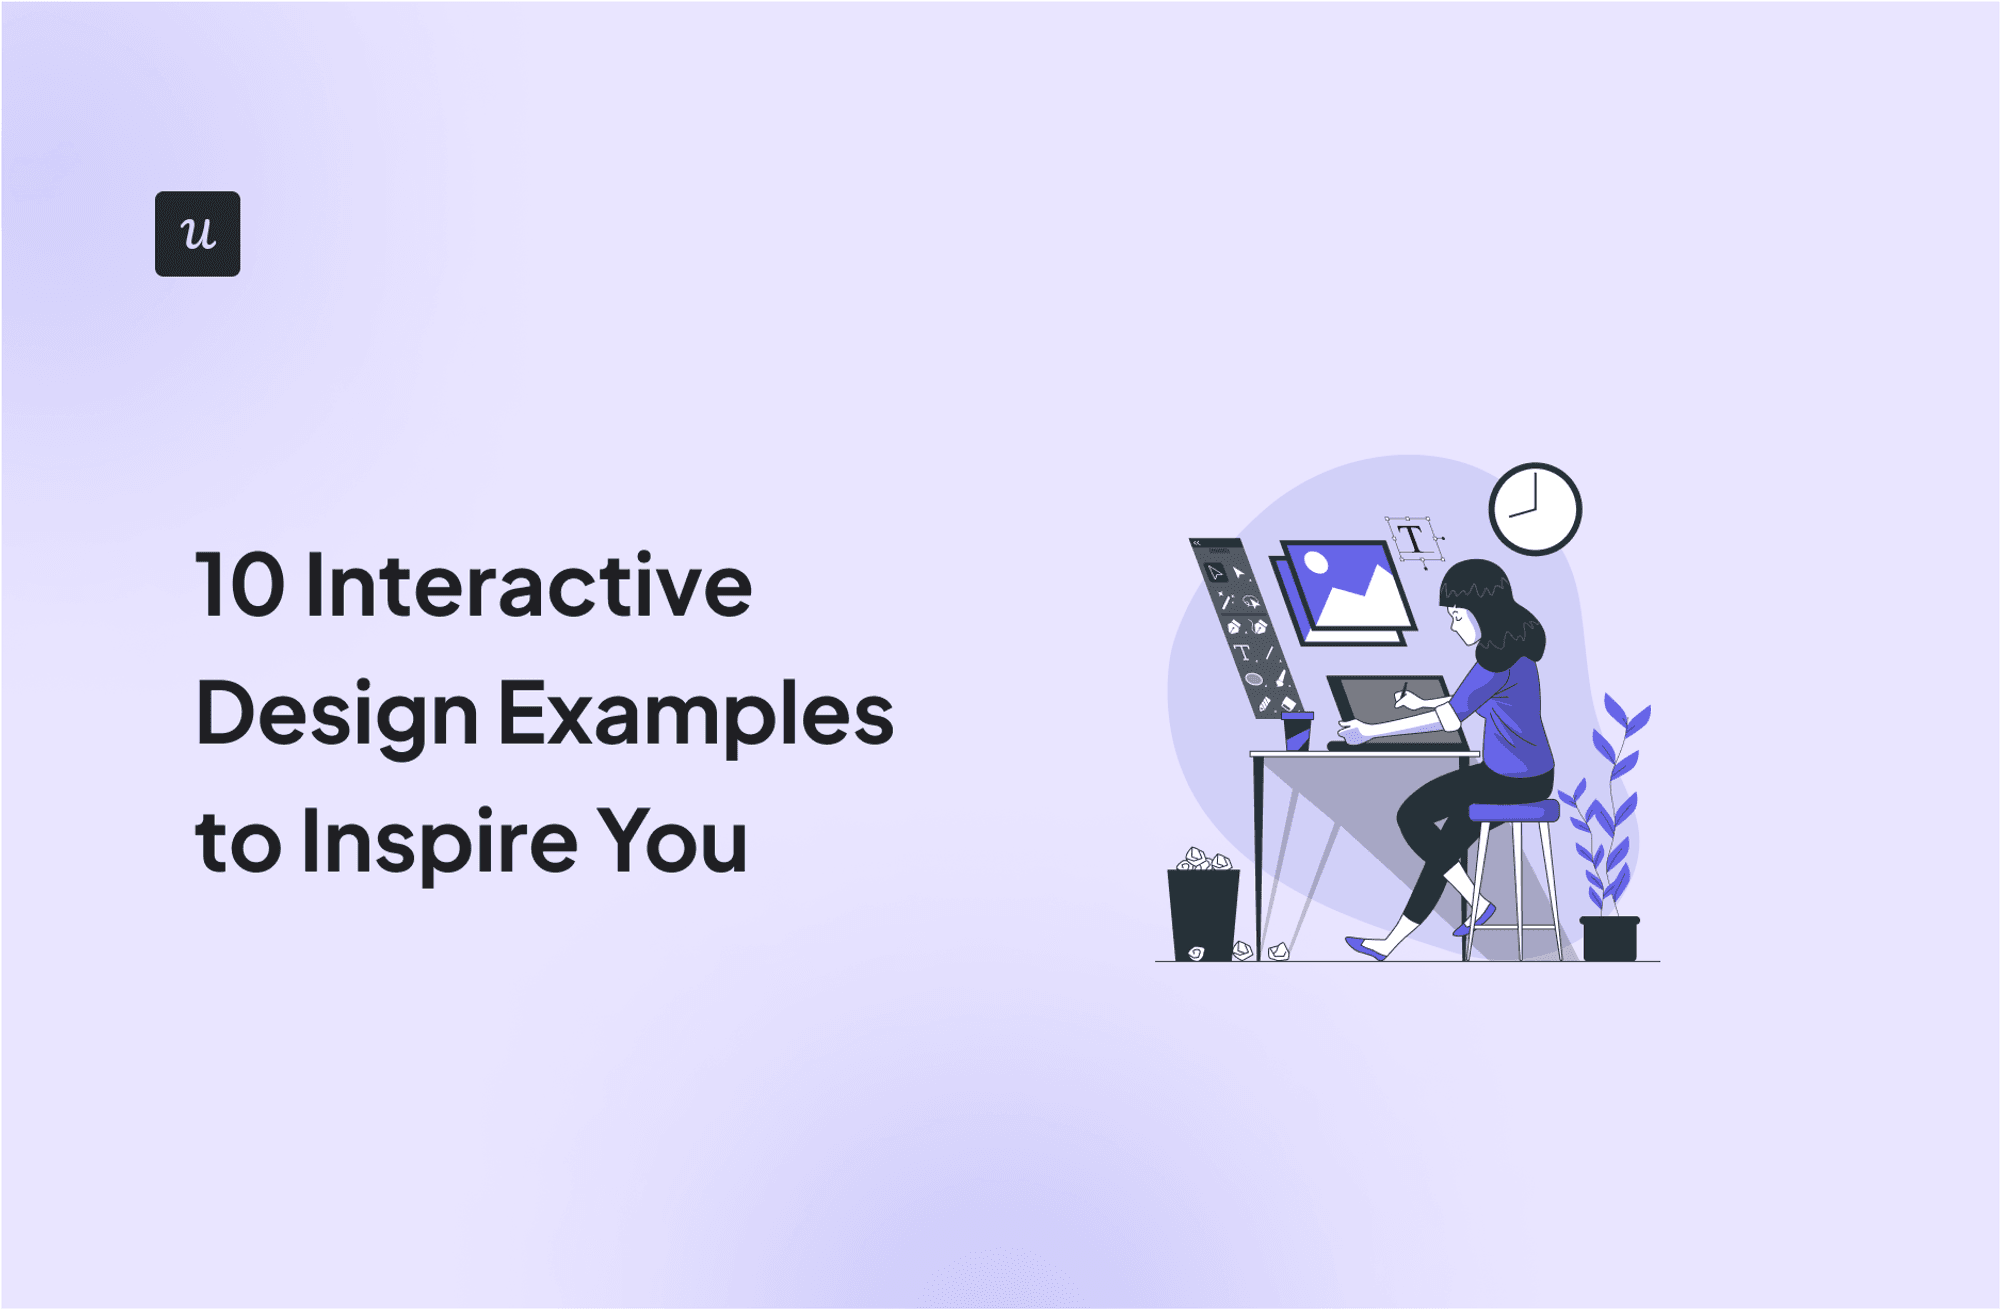 10 Interactive Design Examples to Inspire You cover